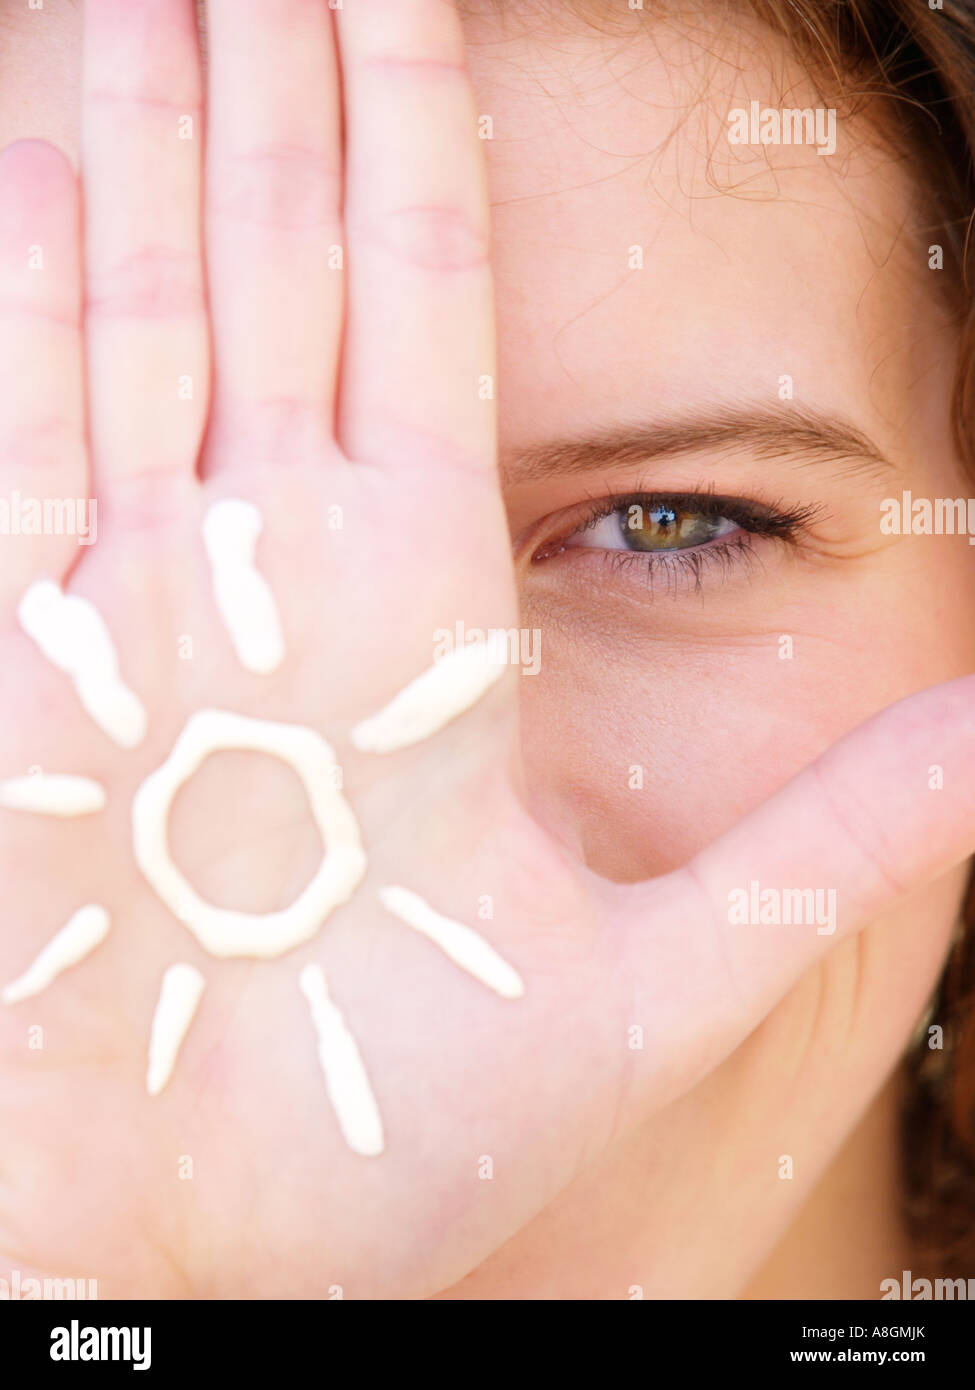 Teenage girls eye and hand closeup with figure of a sun drawn in suncream on her hand Stock Photo